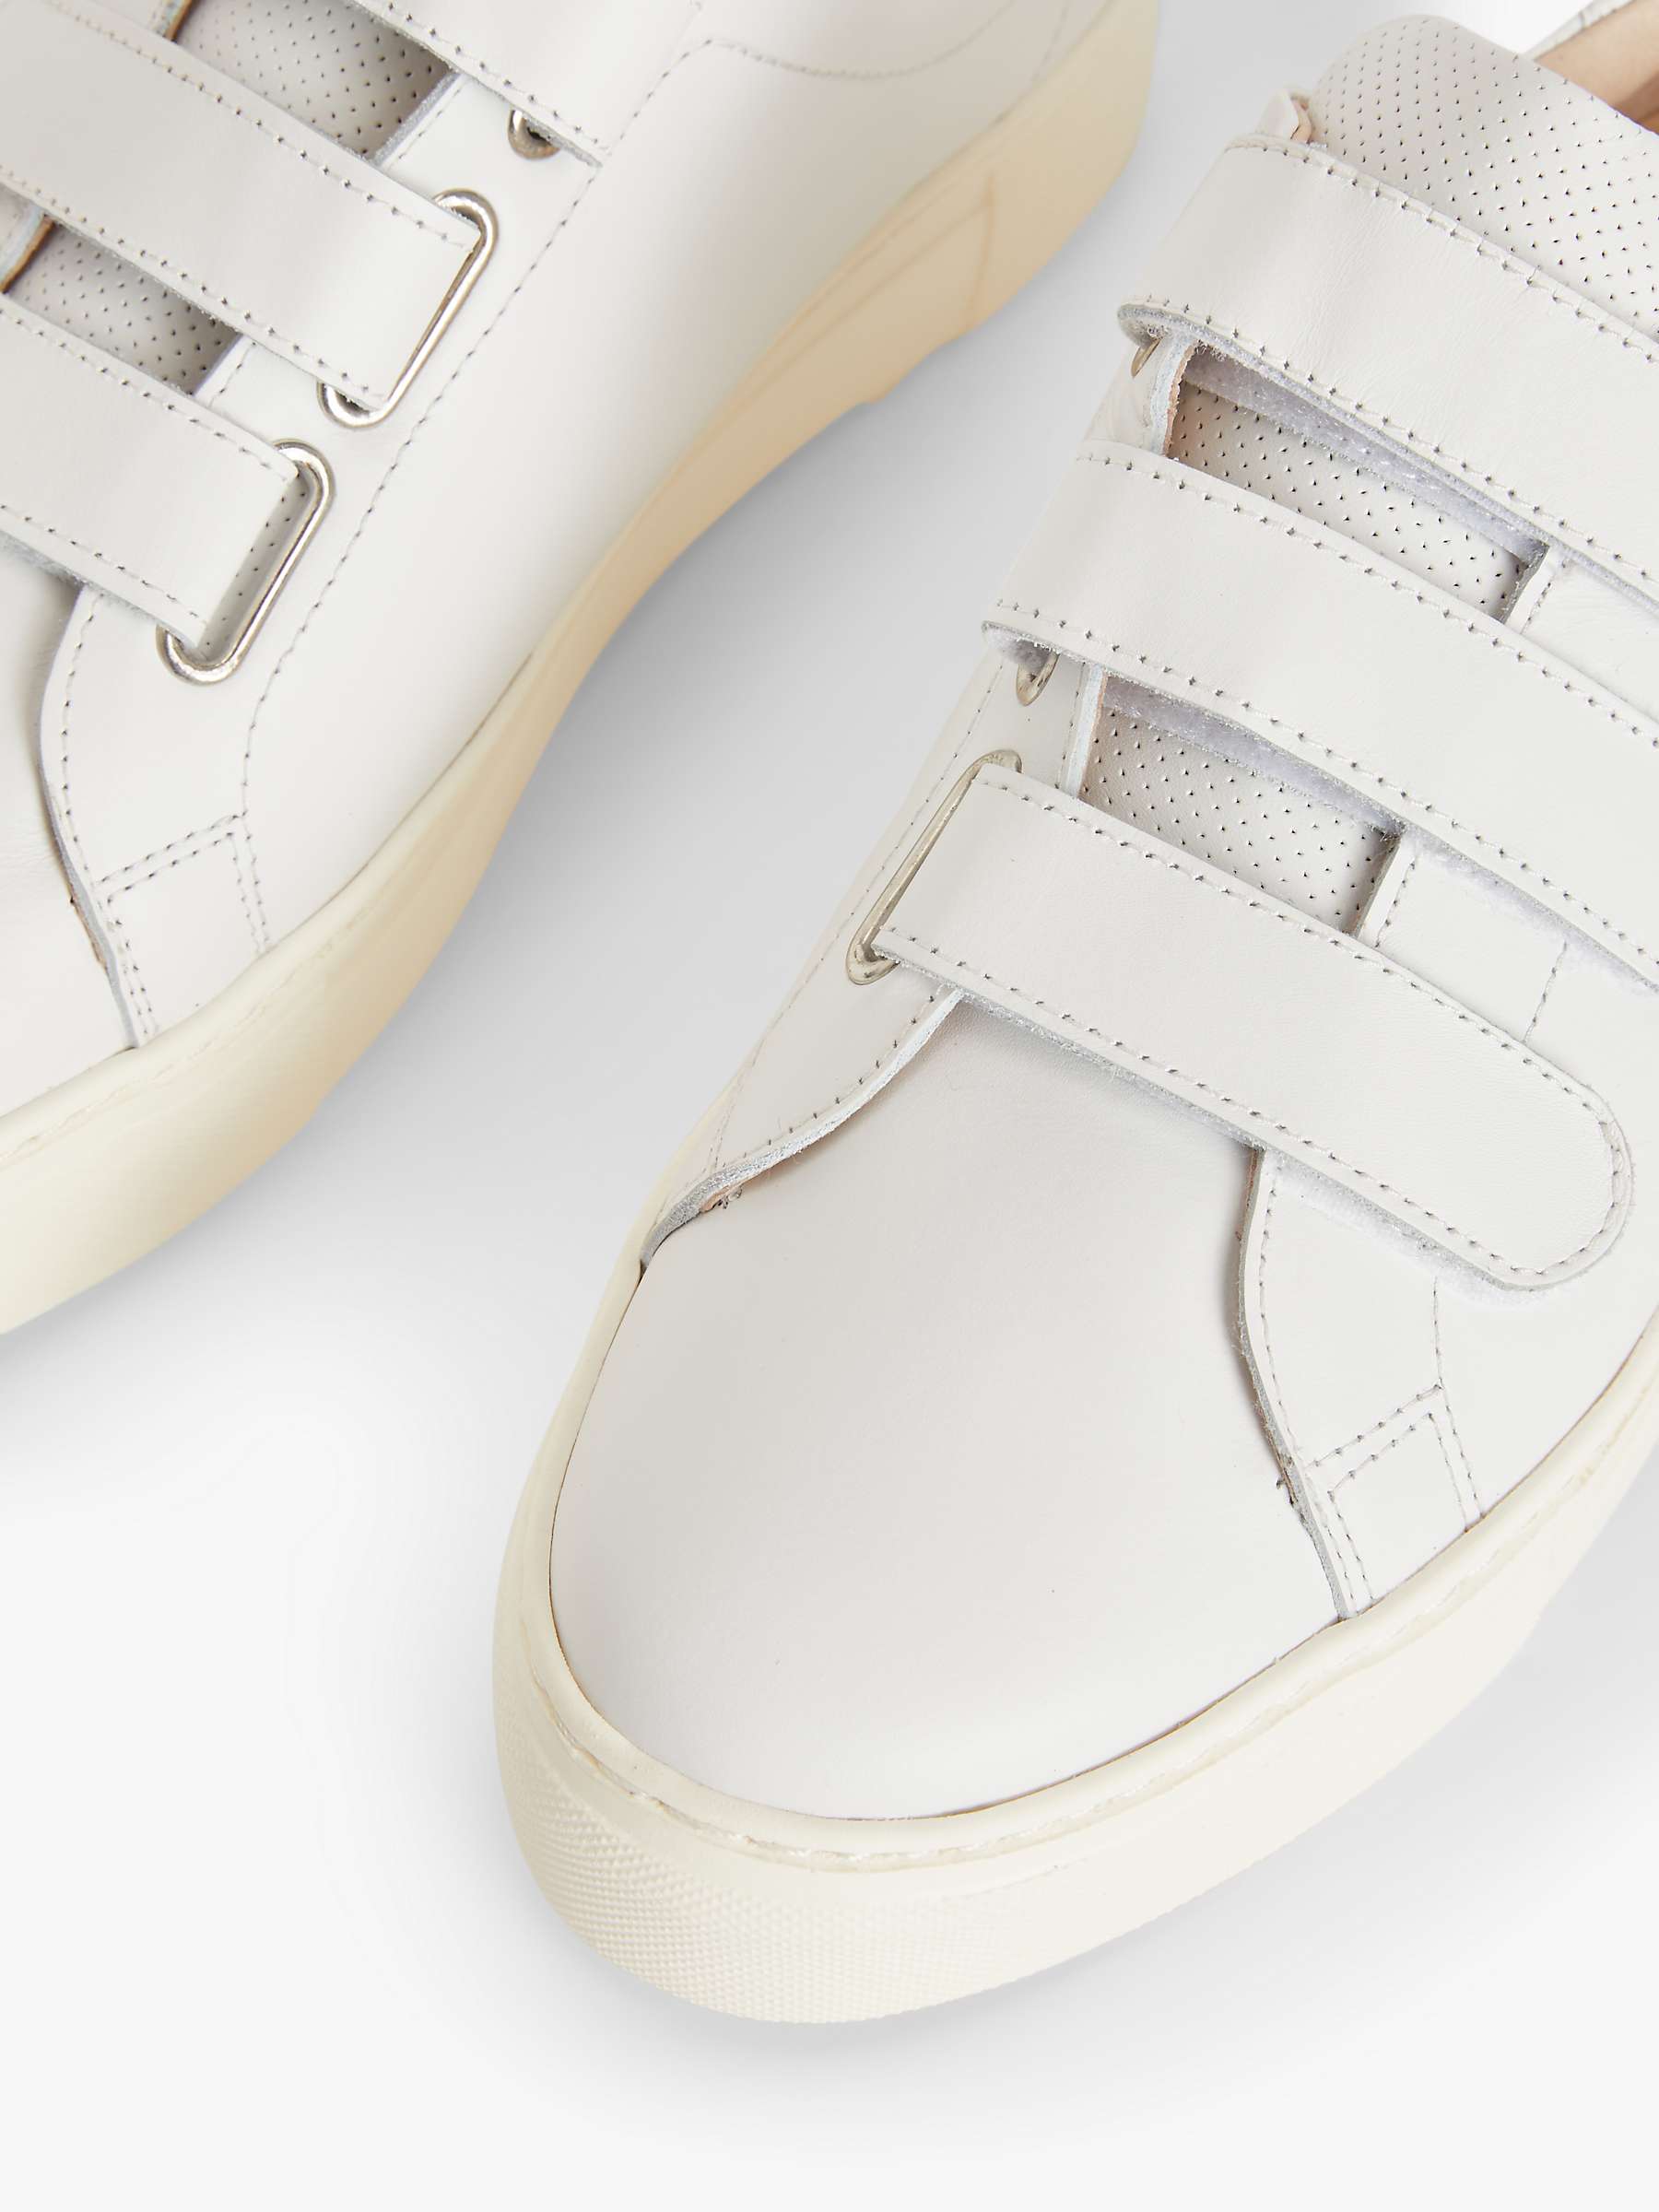 Buy John Lewis Fawne Ripstop Trainers Online at johnlewis.com